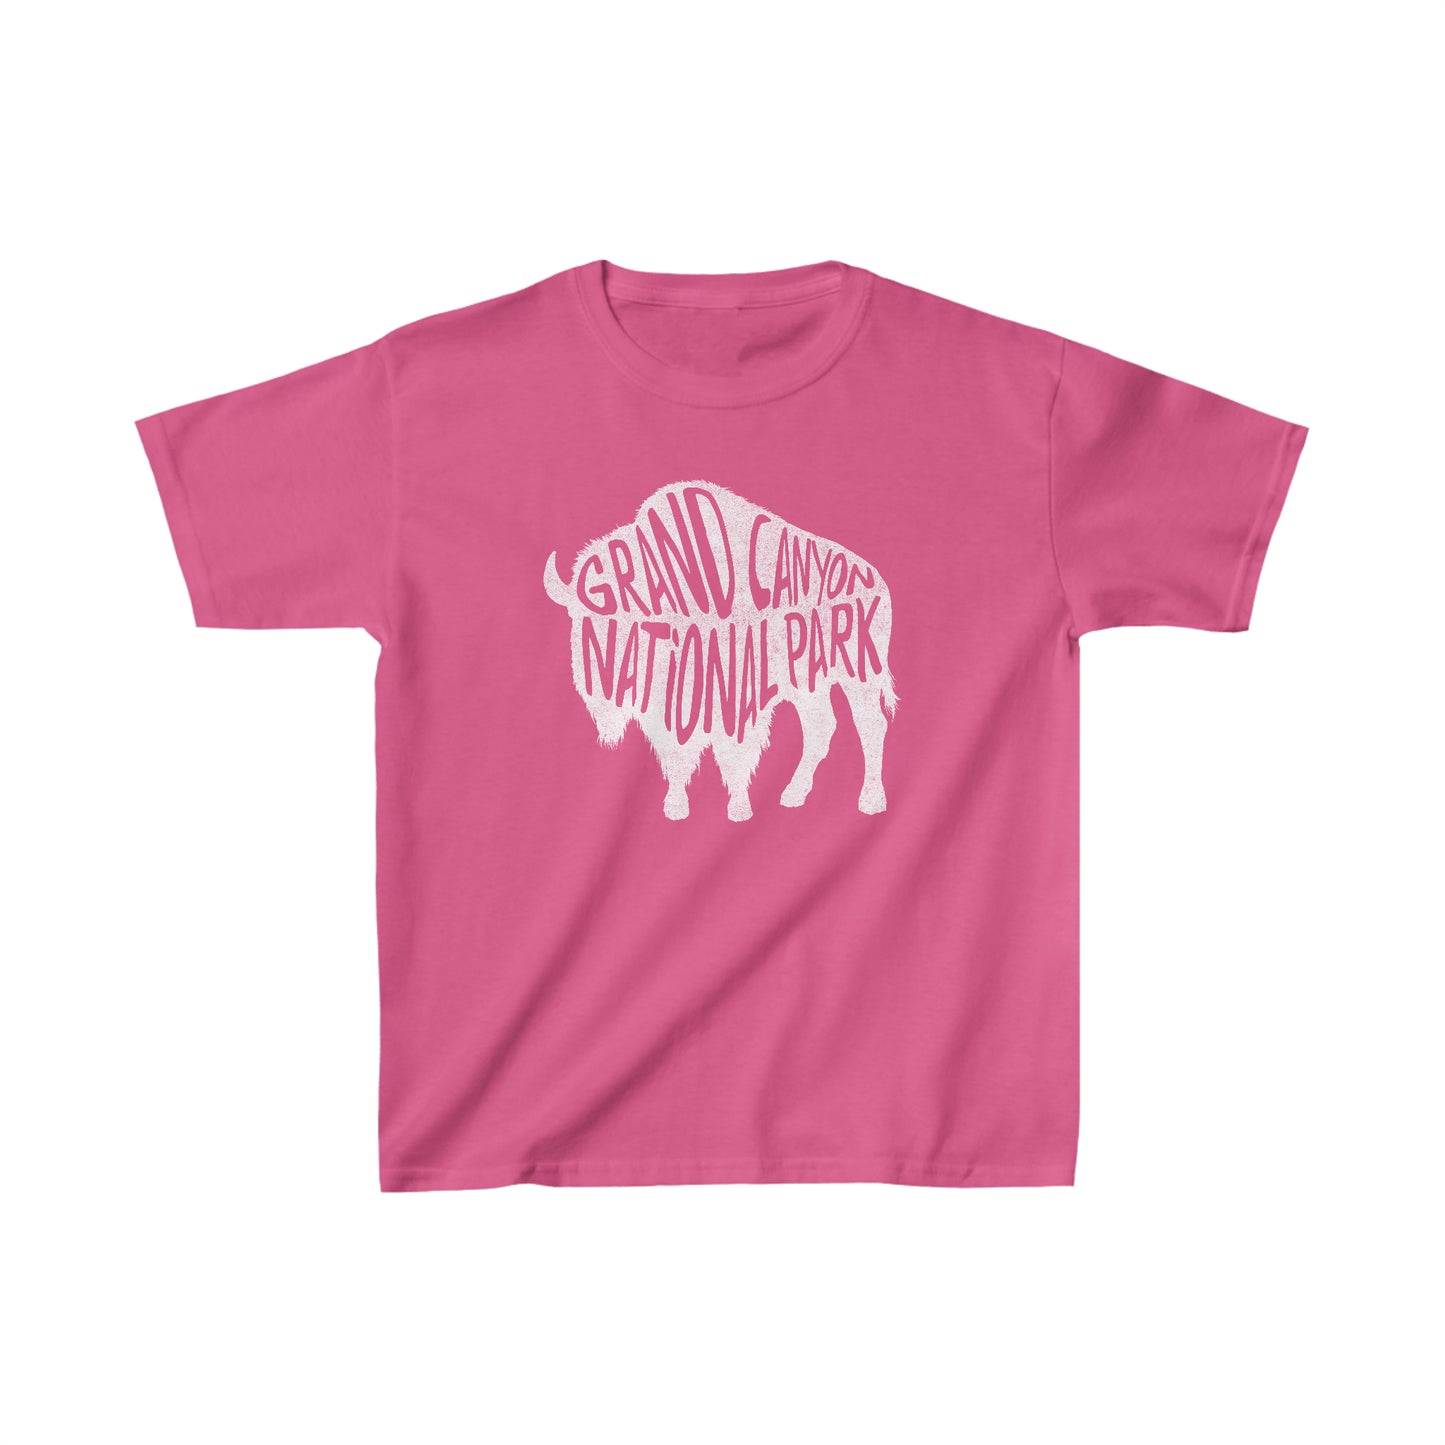 Grand Canyon National Park Child T-Shirt - Bison Chunky Text